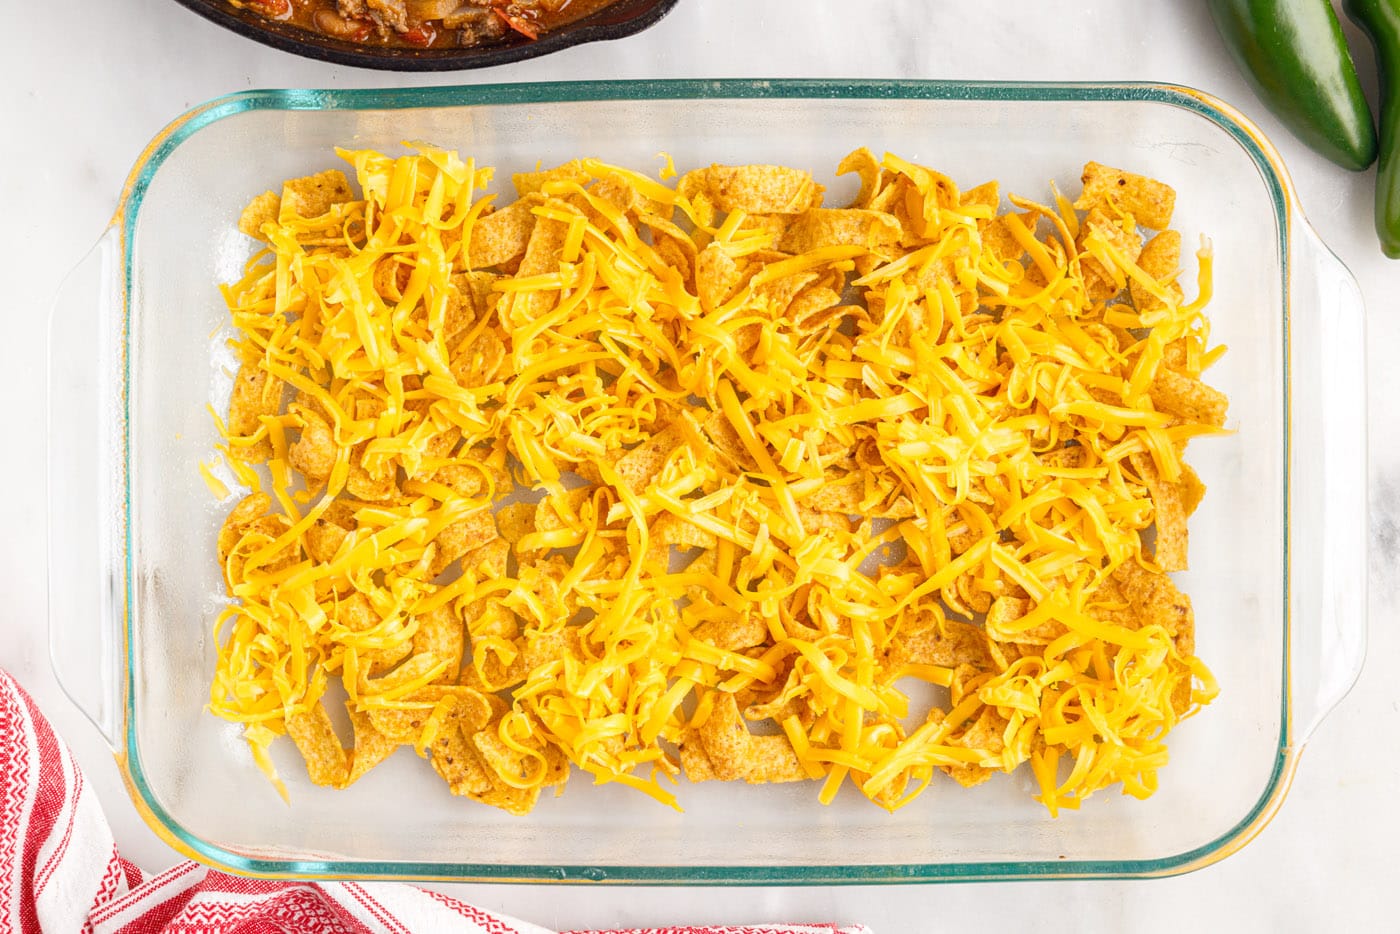 Frito chips and cheese in a casserole dish